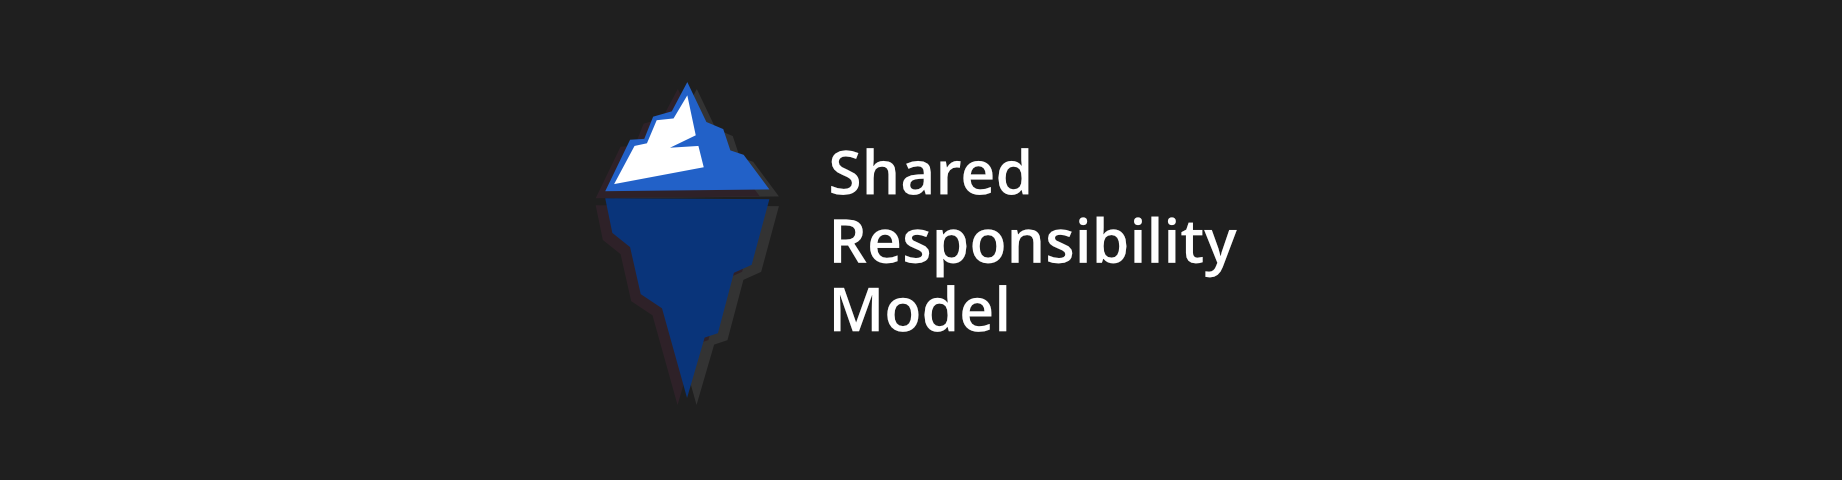 Microsoft Shared Responsibility Model - understanding your role - Xopero  Blog